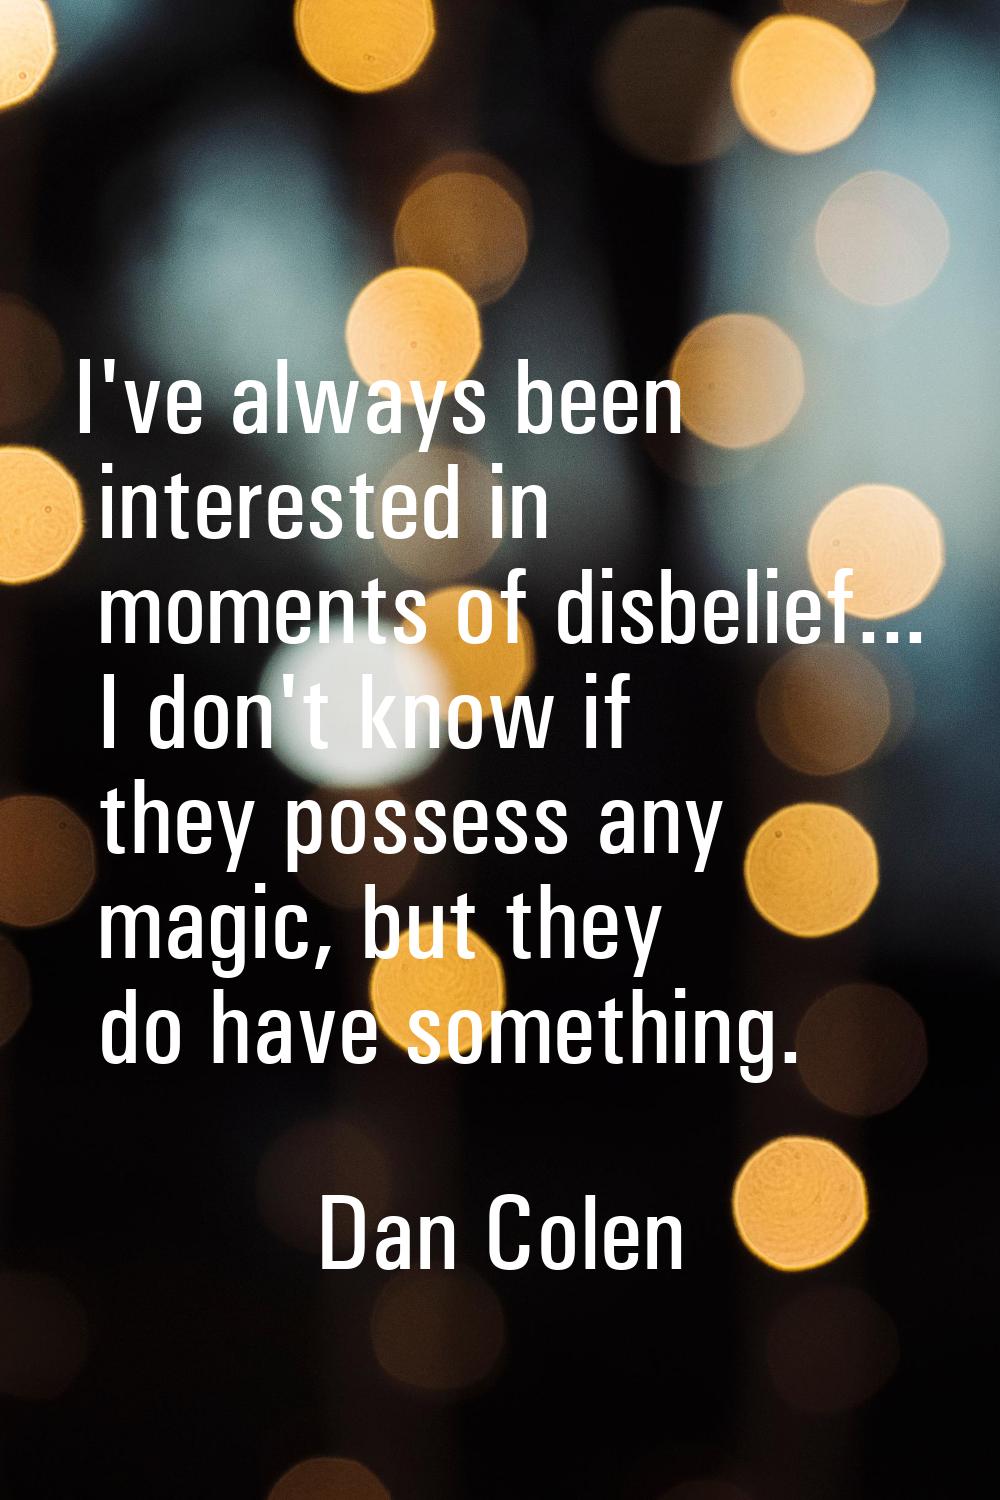 I've always been interested in moments of disbelief... I don't know if they possess any magic, but 